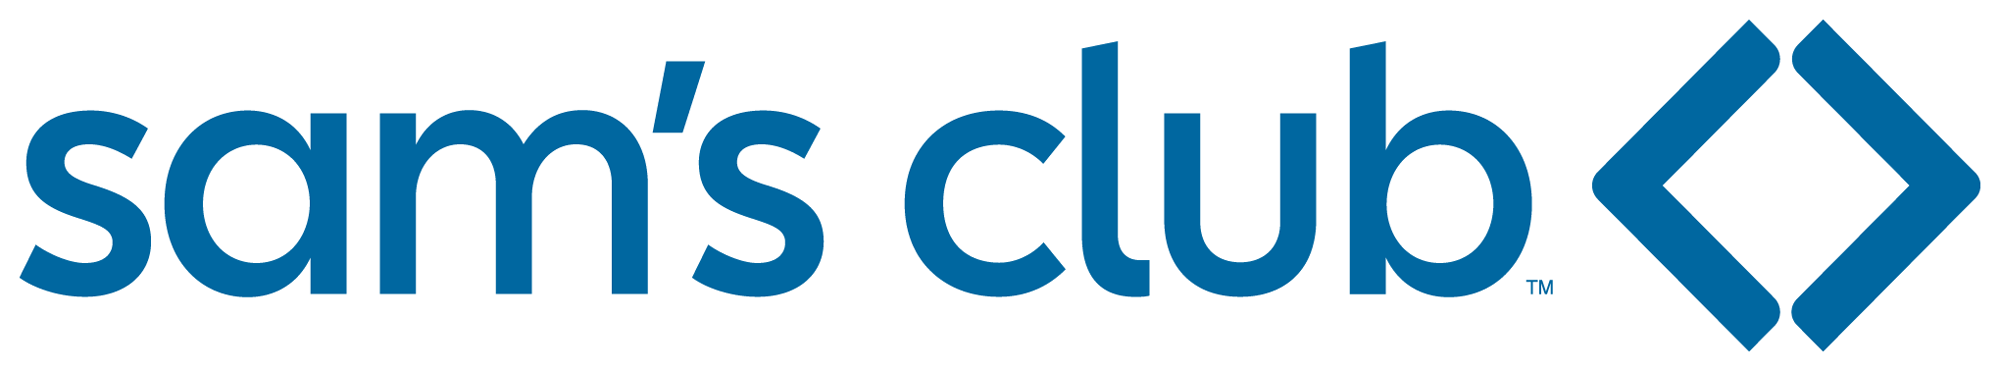 Sam’s Club - Join for $45, get a $45 gift card.